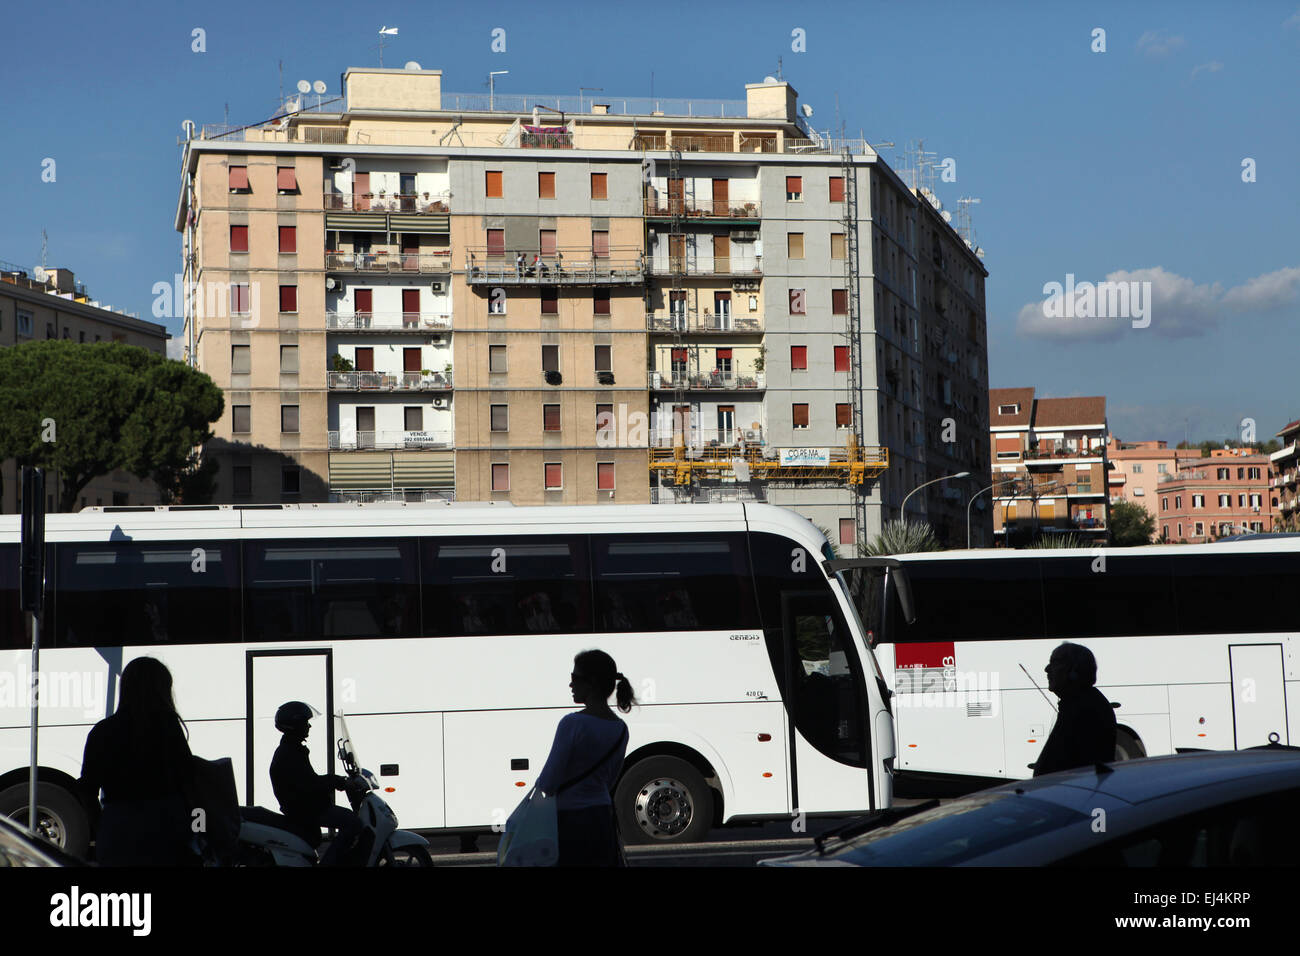 People wait for buses at Piazza dei Partigiani in front of the Roma Ostiense Railway Station in Rome, Italy. Stock Photo